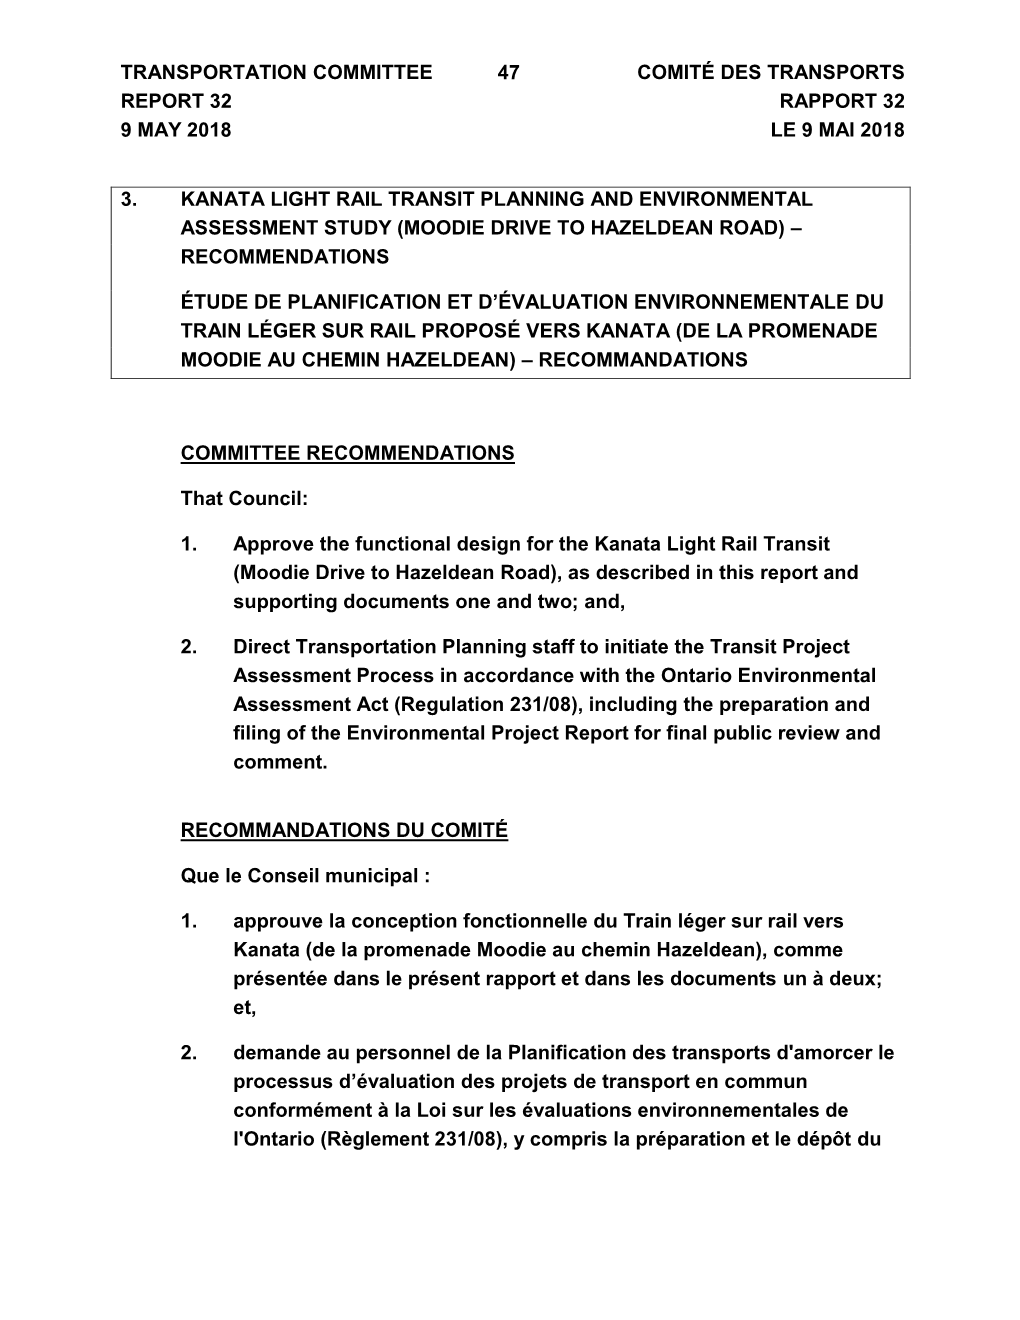 Kanata Light Rail Transit Planning and Environmental Assessment Study (Moodie Drive to Hazeldean Road) – Recommendations